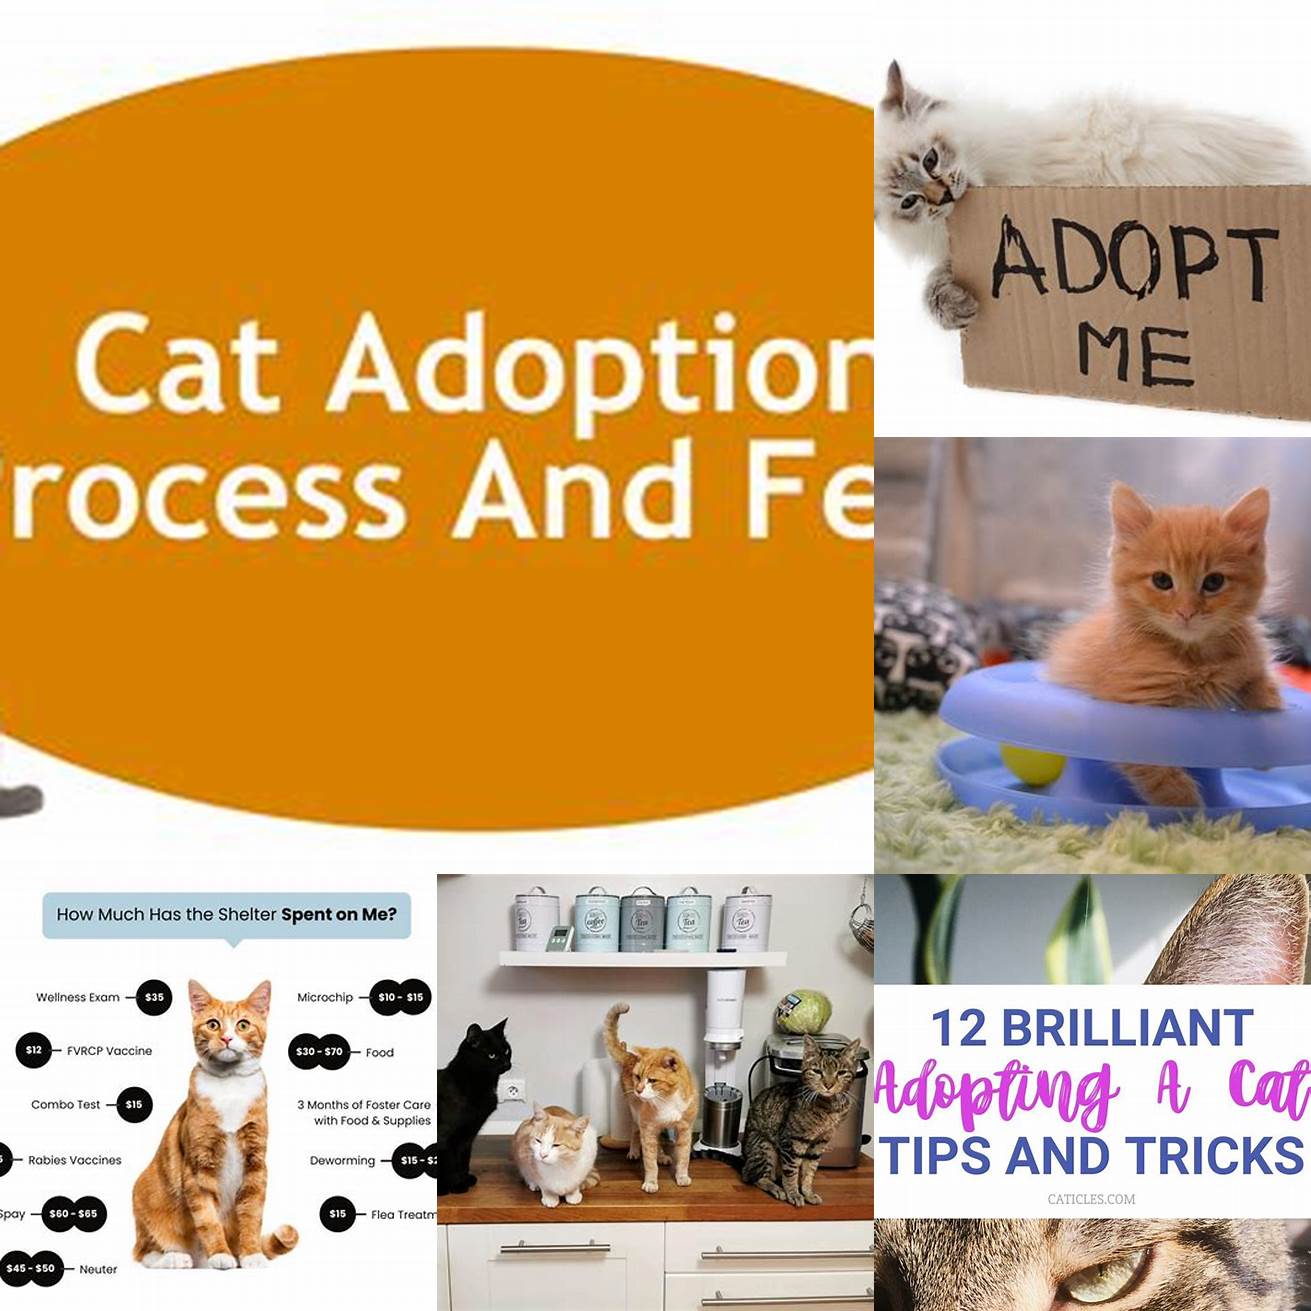 Be prepared for the adoption process